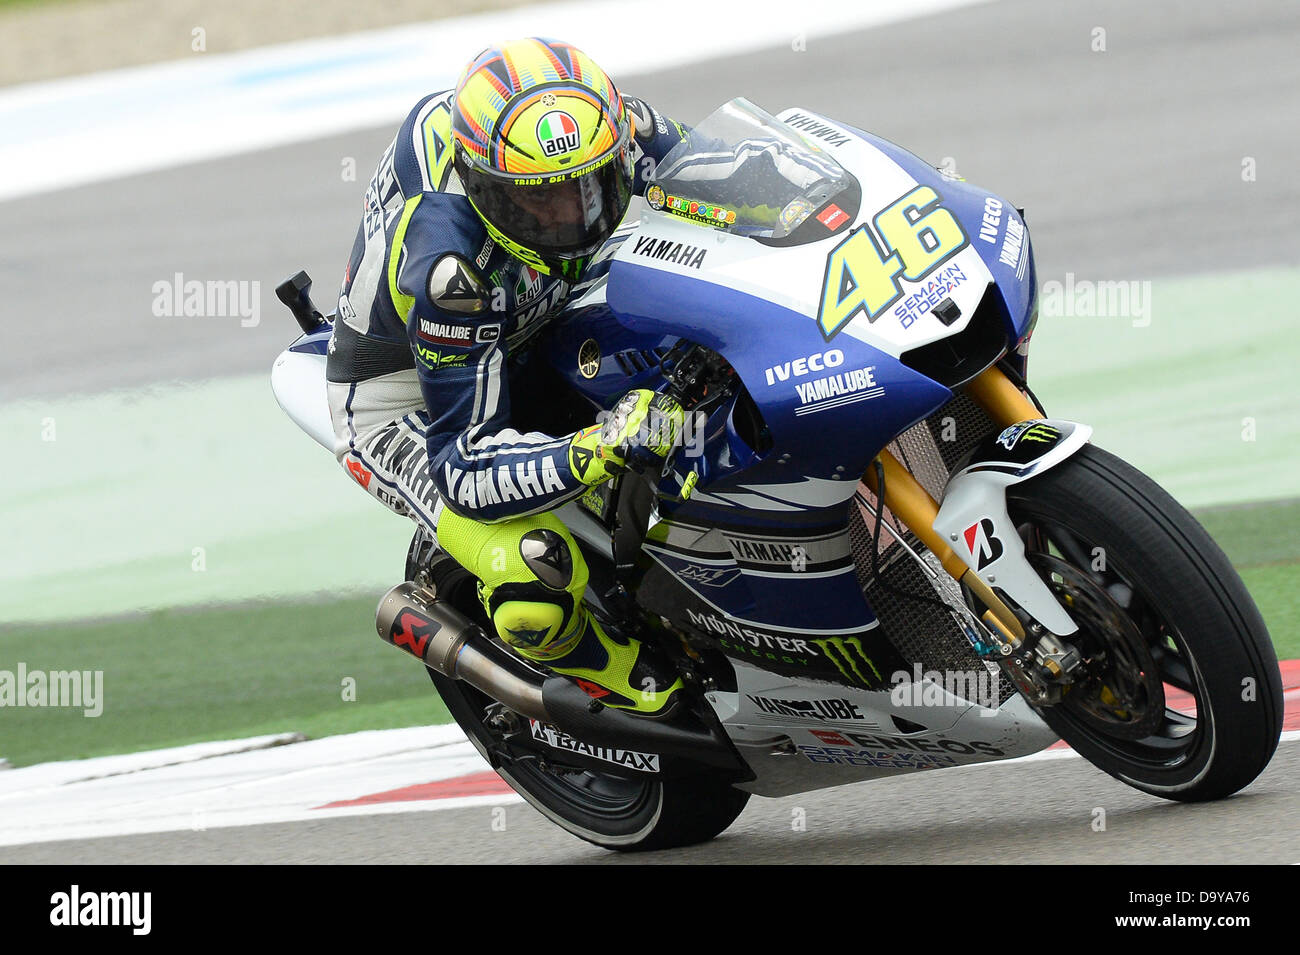 Assen, Netherlands. 28th June 2013.Valentino Rossi (Yamaha Factory Racing)during the qualifying sessions at TT ASSEN circuit. Credit:  Gaetano Piazzolla/Alamy Live News Stock Photo